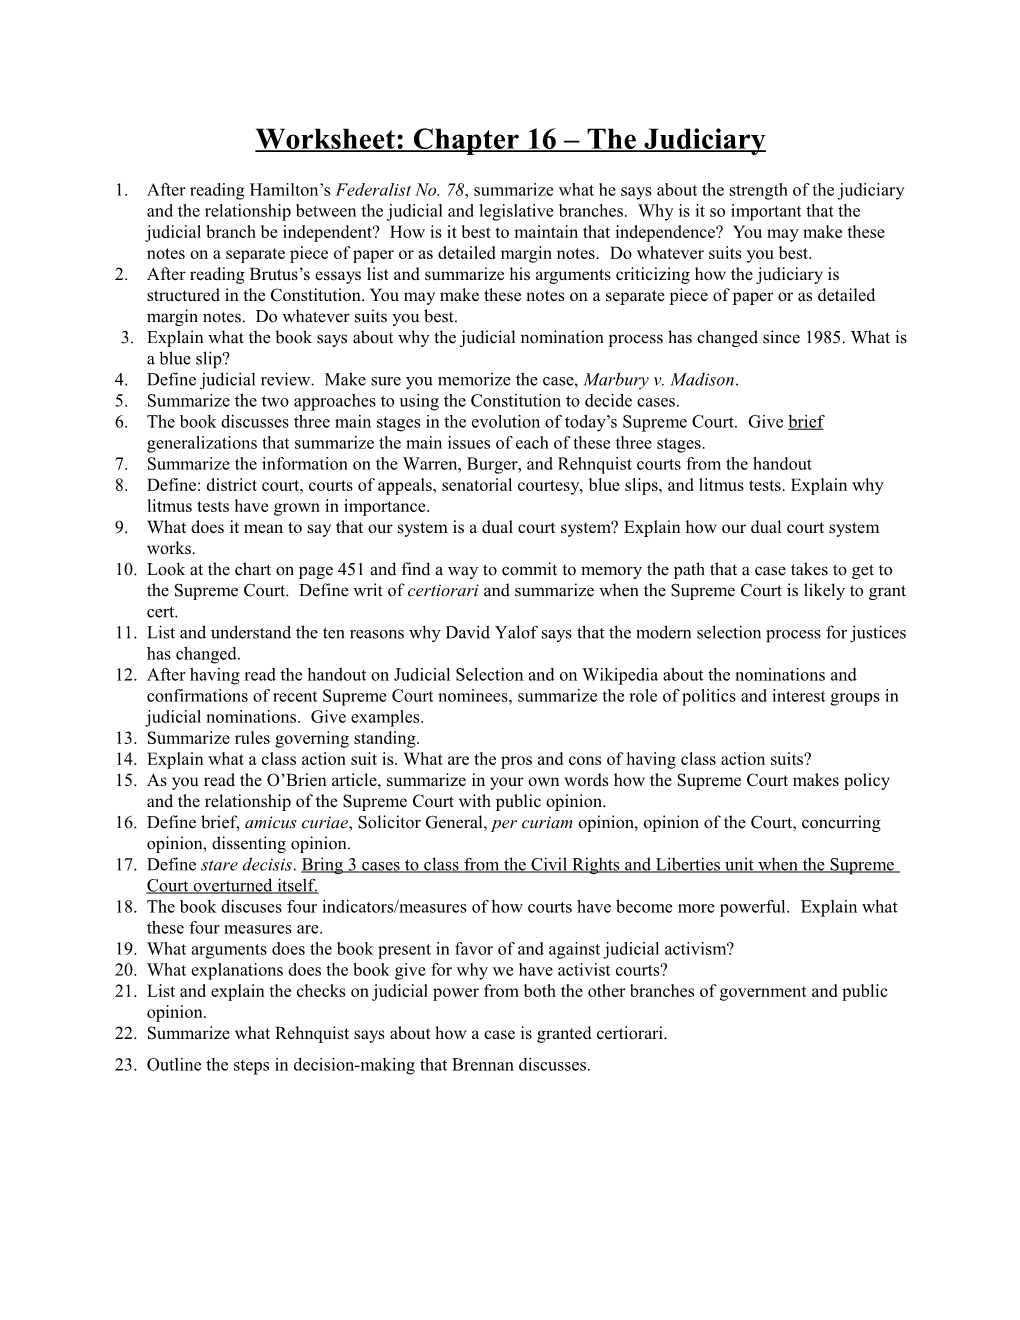 Worksheet: Chapter 16 the Judiciary